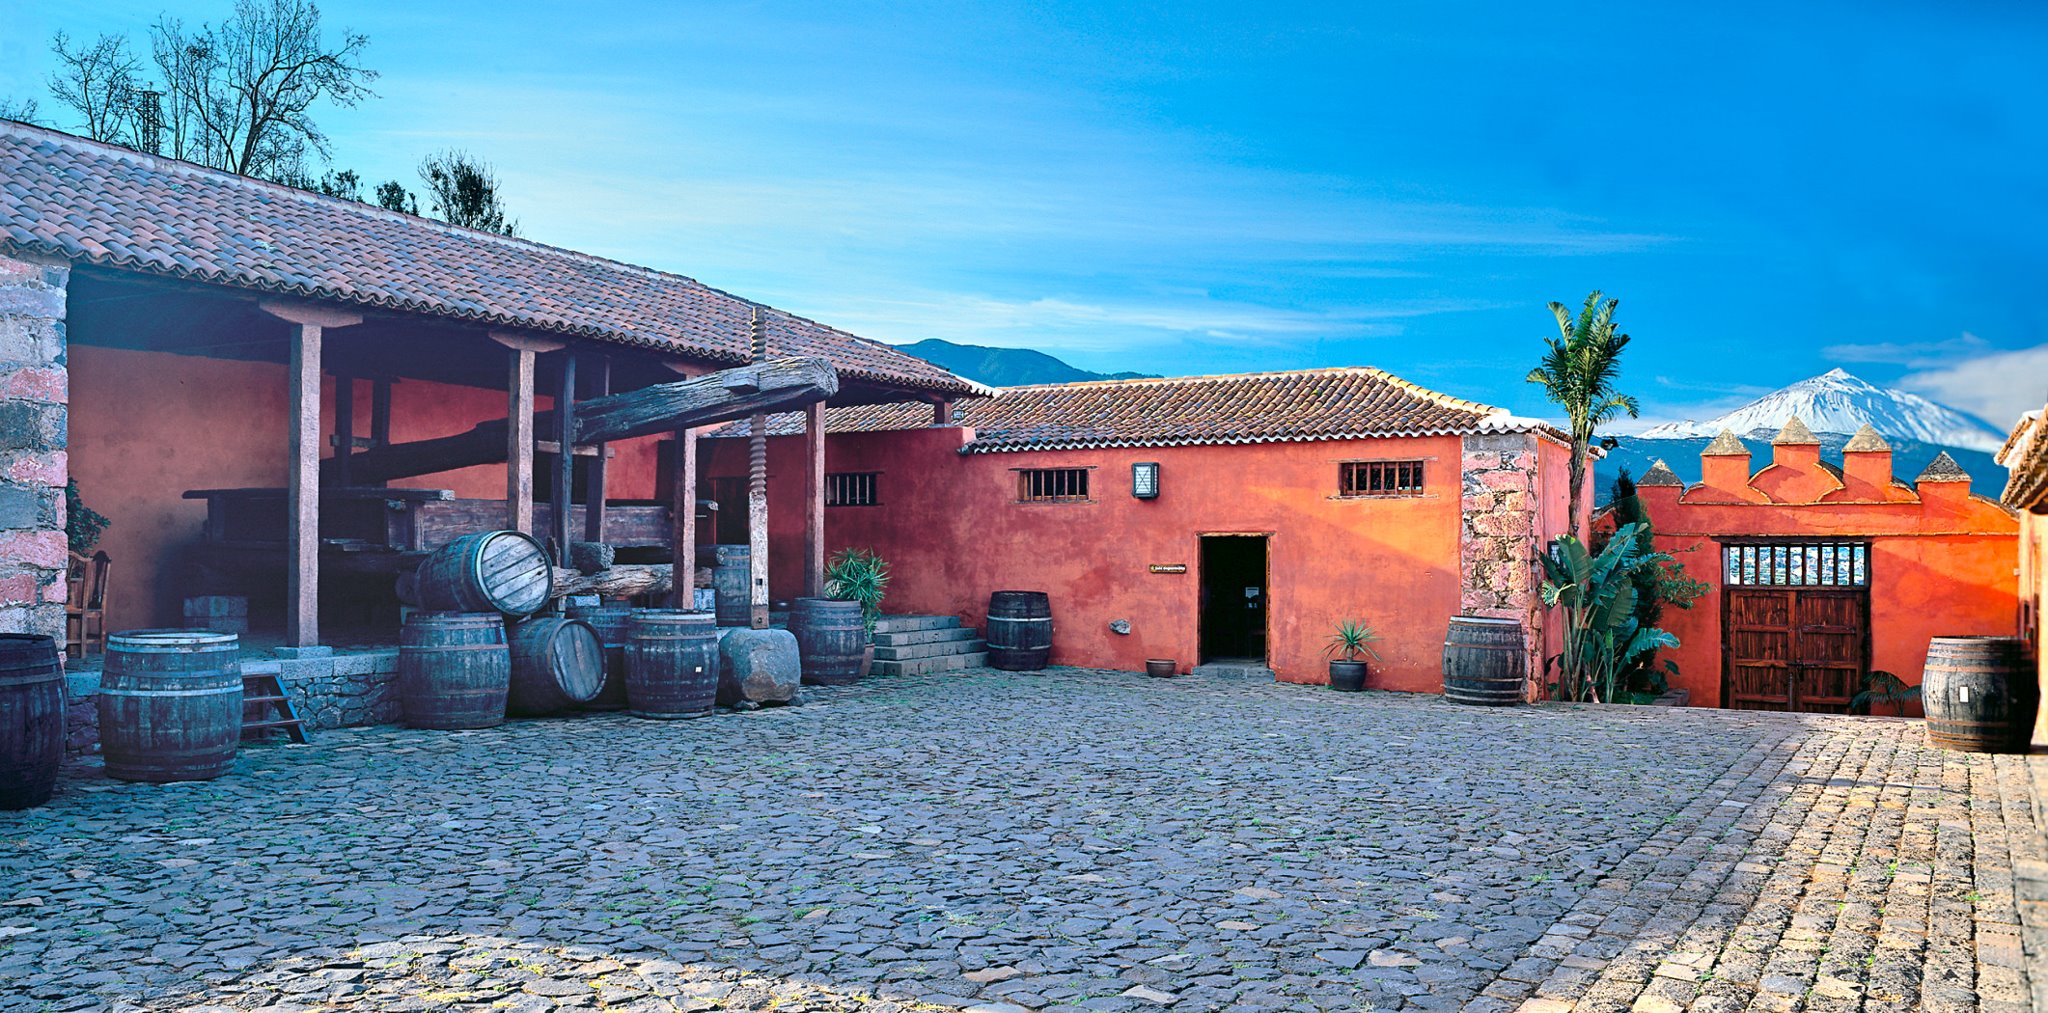 The Best Wine Tours In Tenerife